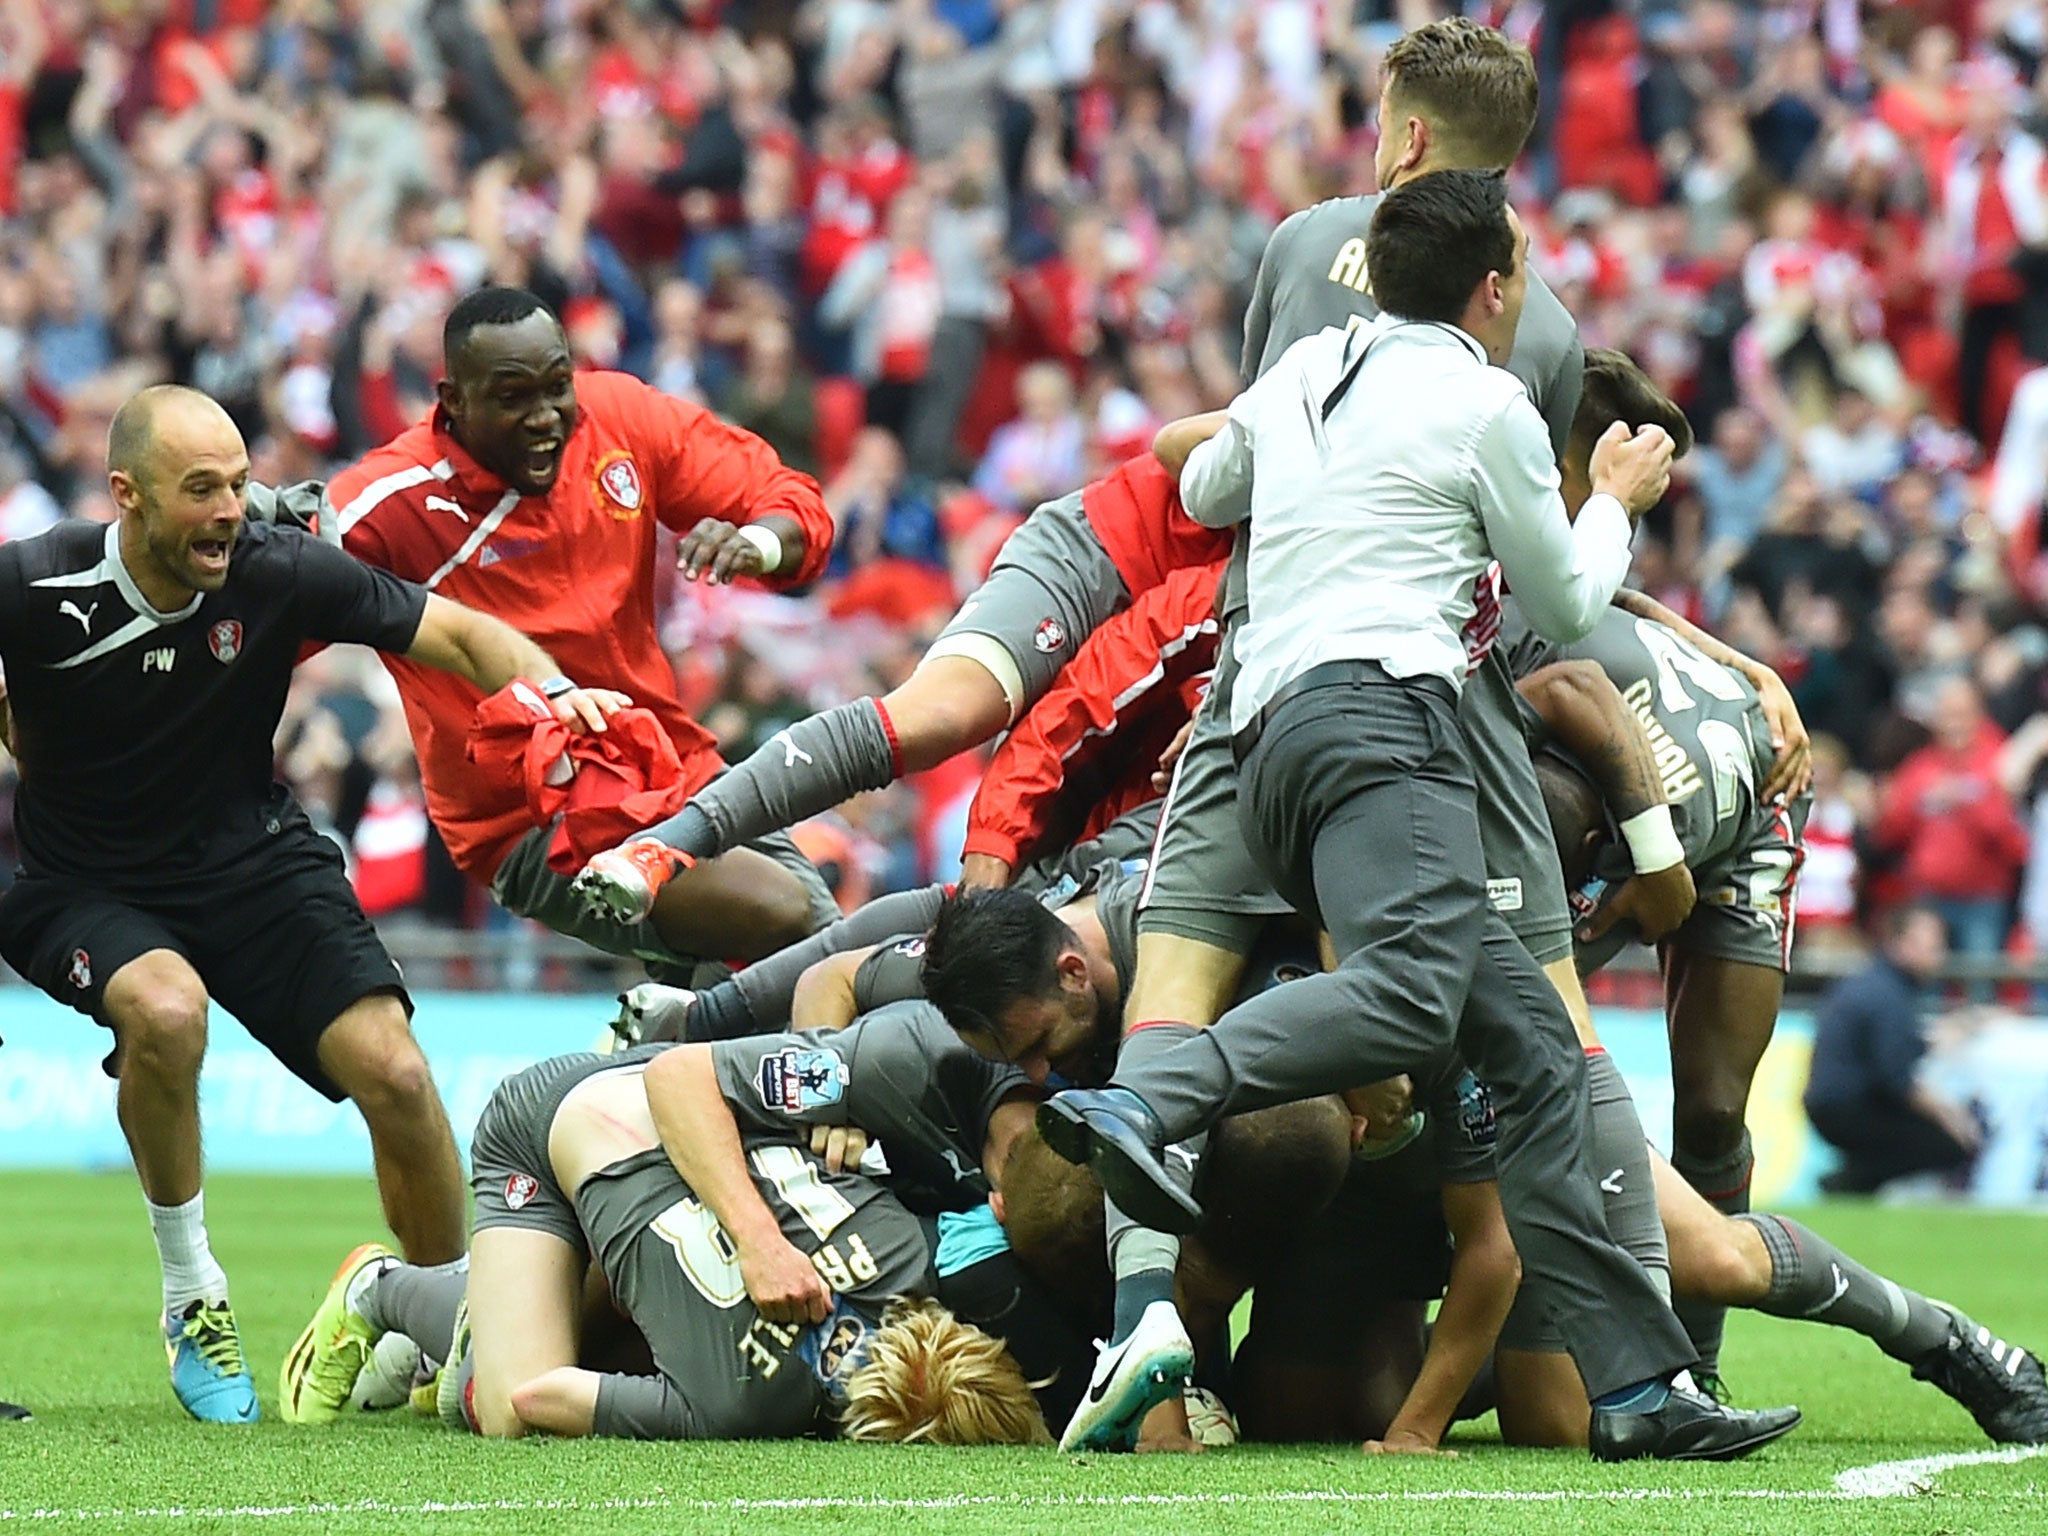 Rotherham United players and staff celebrate after winning Sunday’s League One play-off final against Leyton Orient following a penalty shoot-out at Wembley